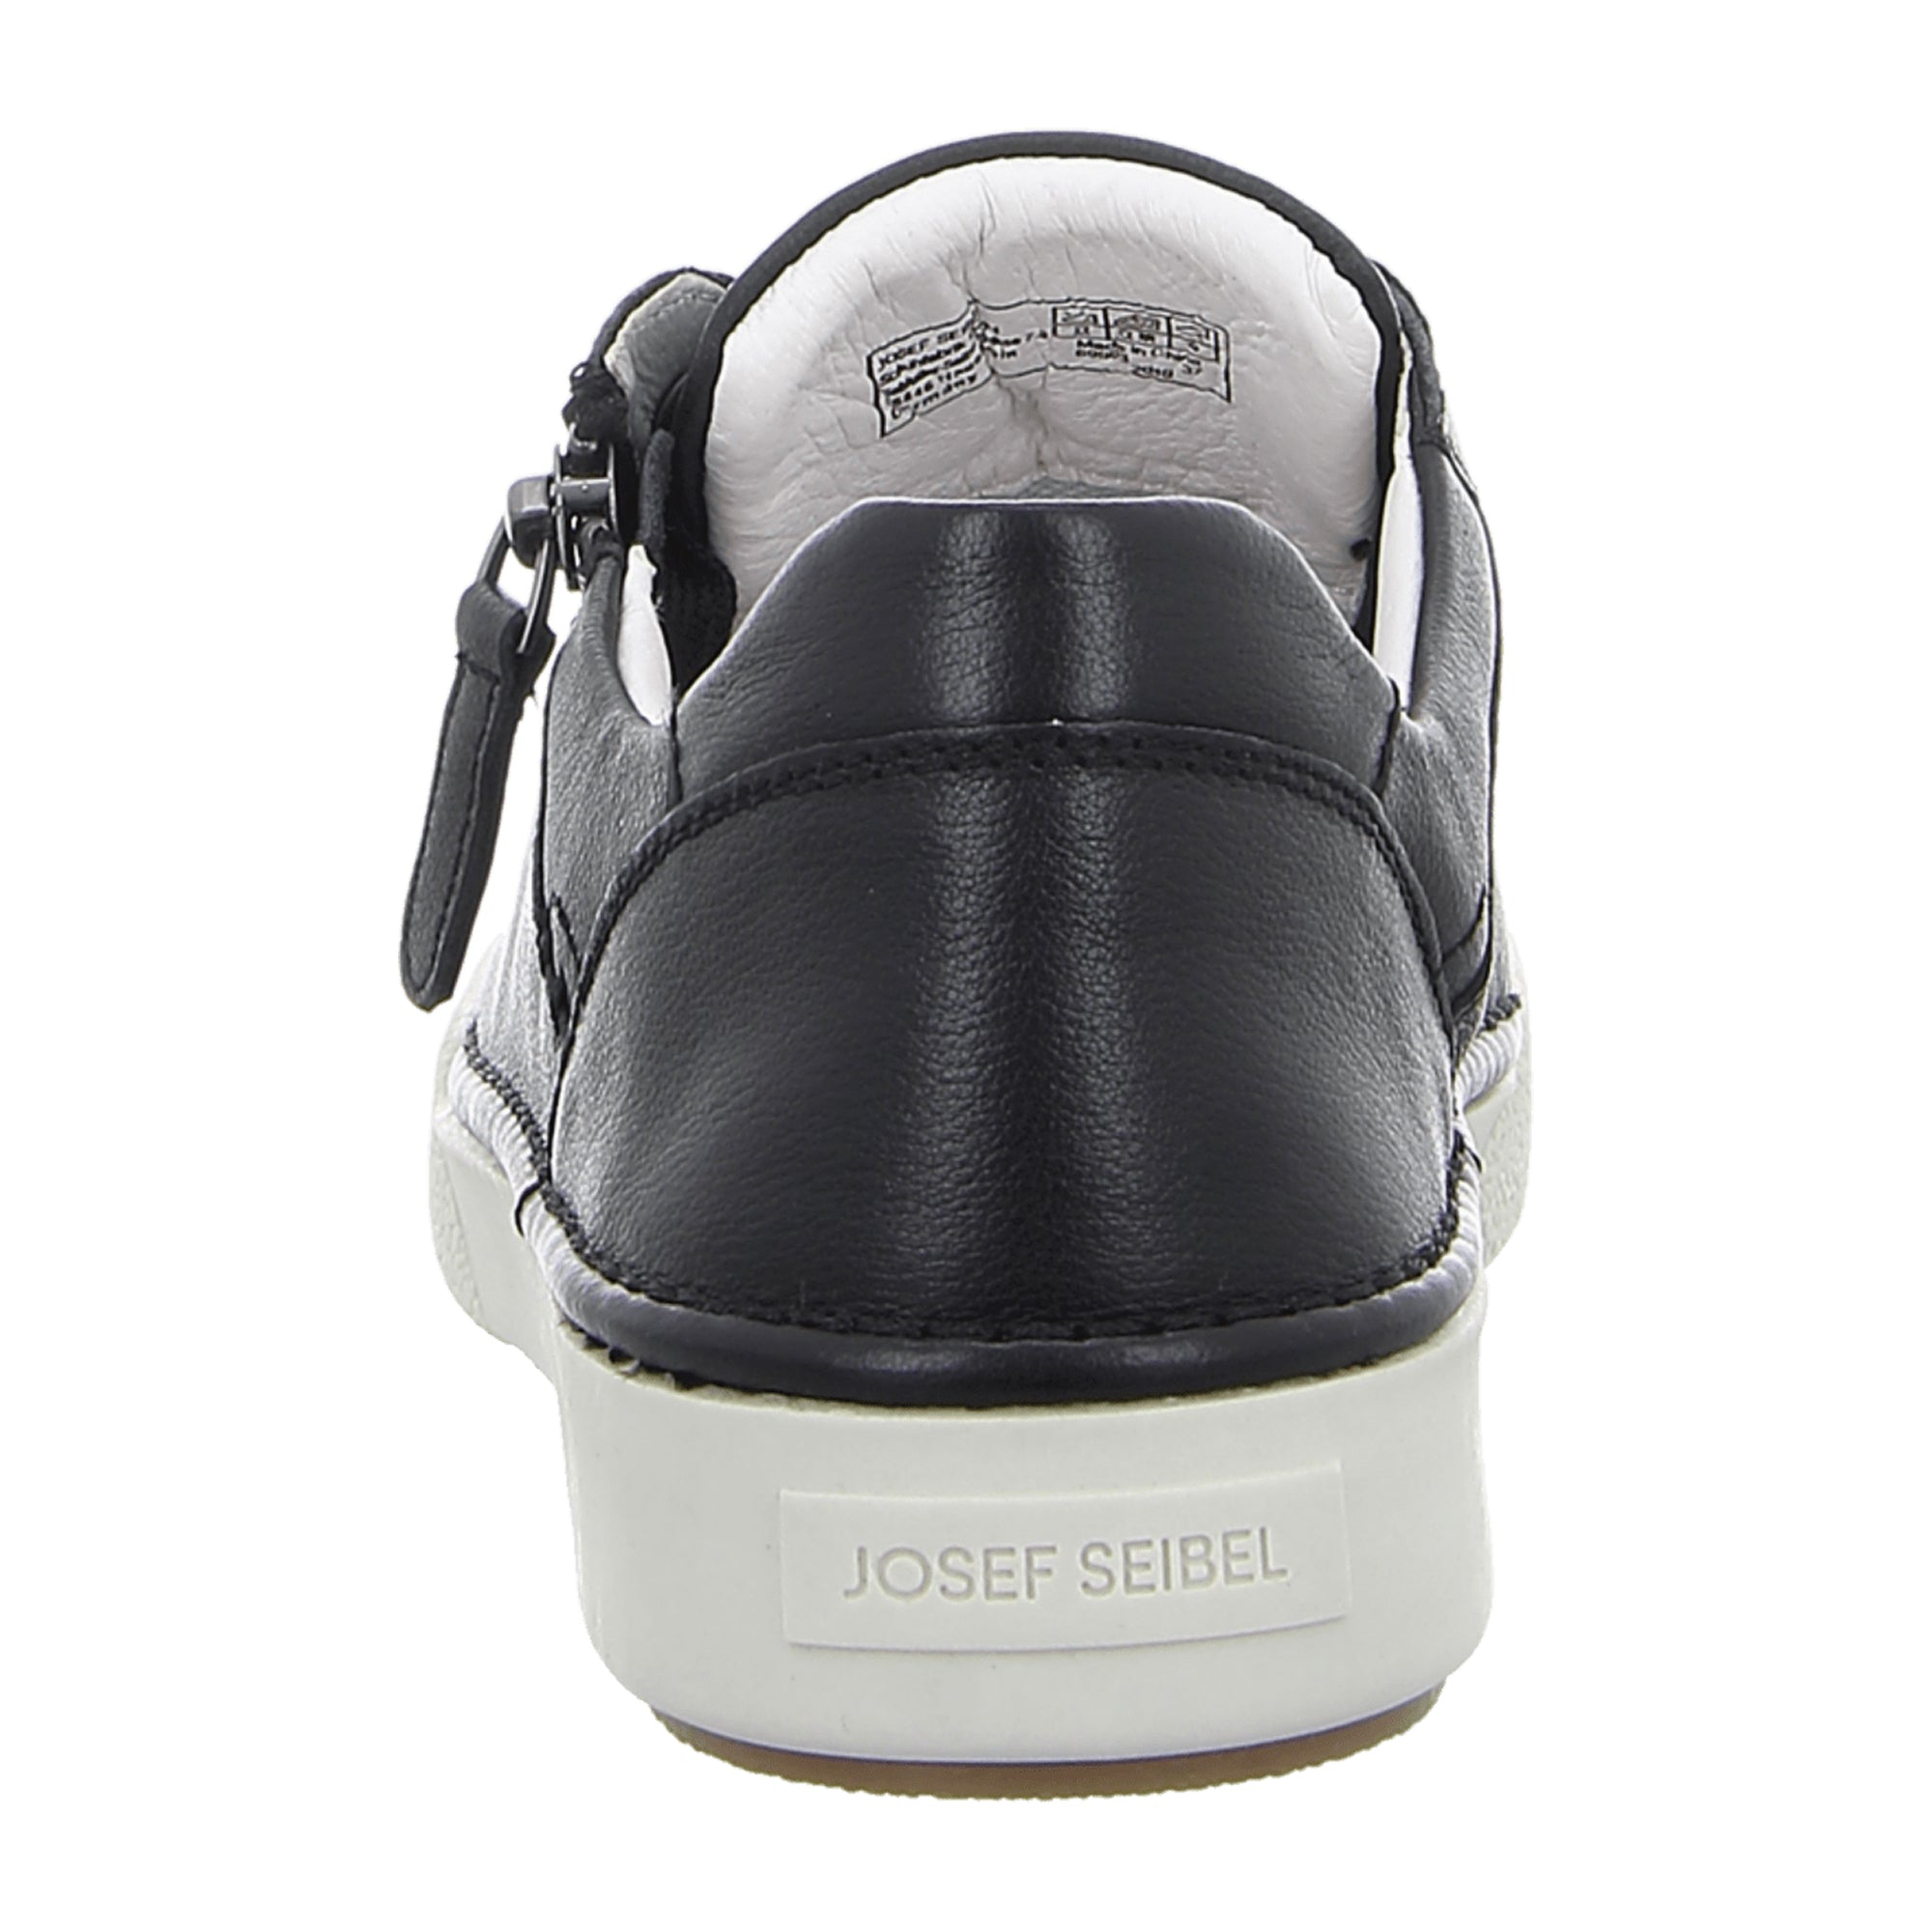 Comfortable Lace-up Shoes for Women in Black by Josef Seibel